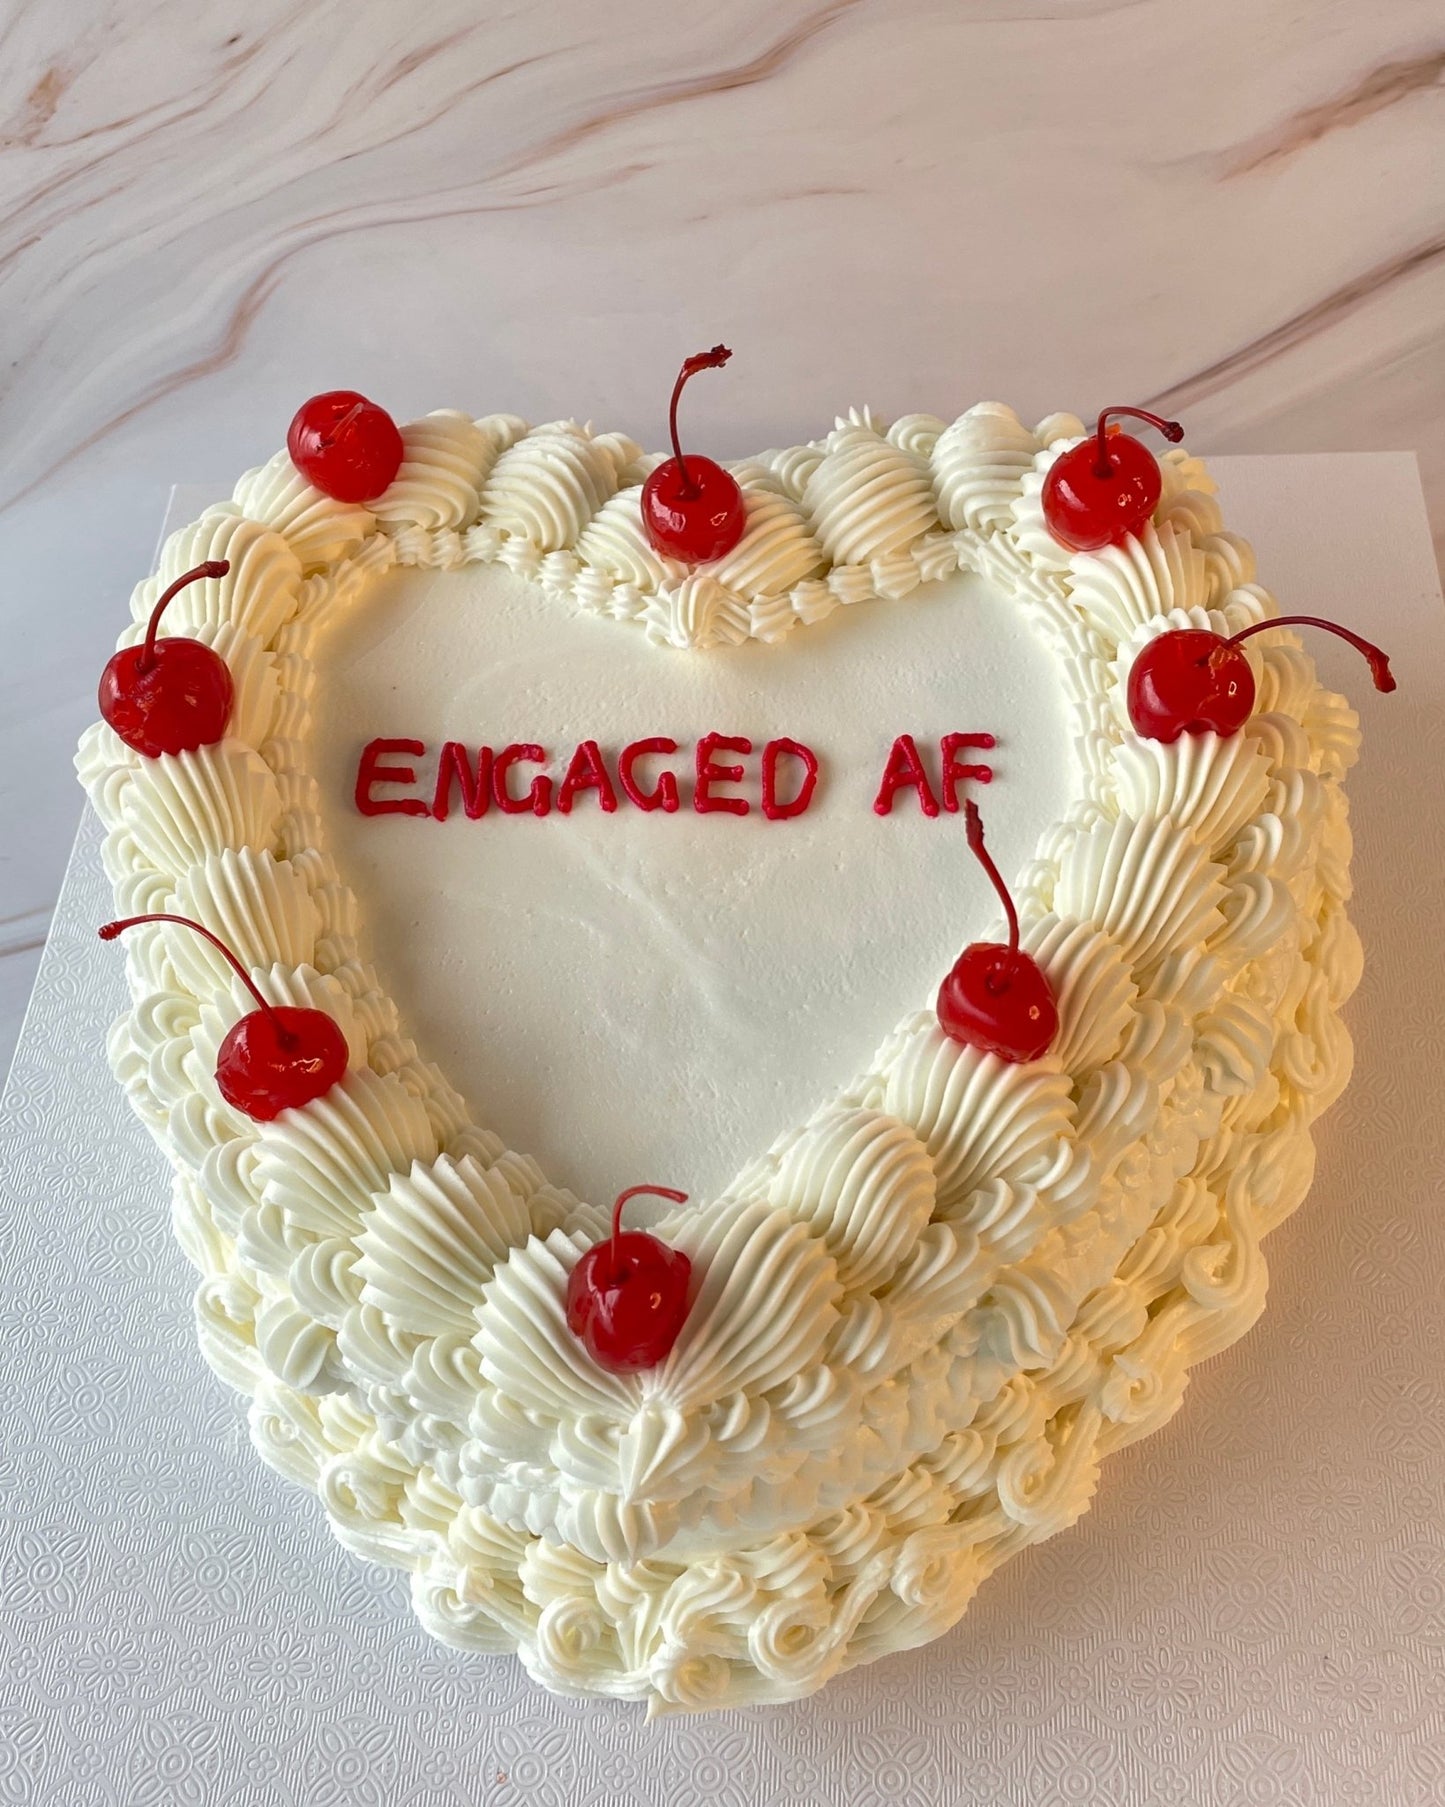 M128) Red and White Heart Cake (Half Kg). – Tricity 24